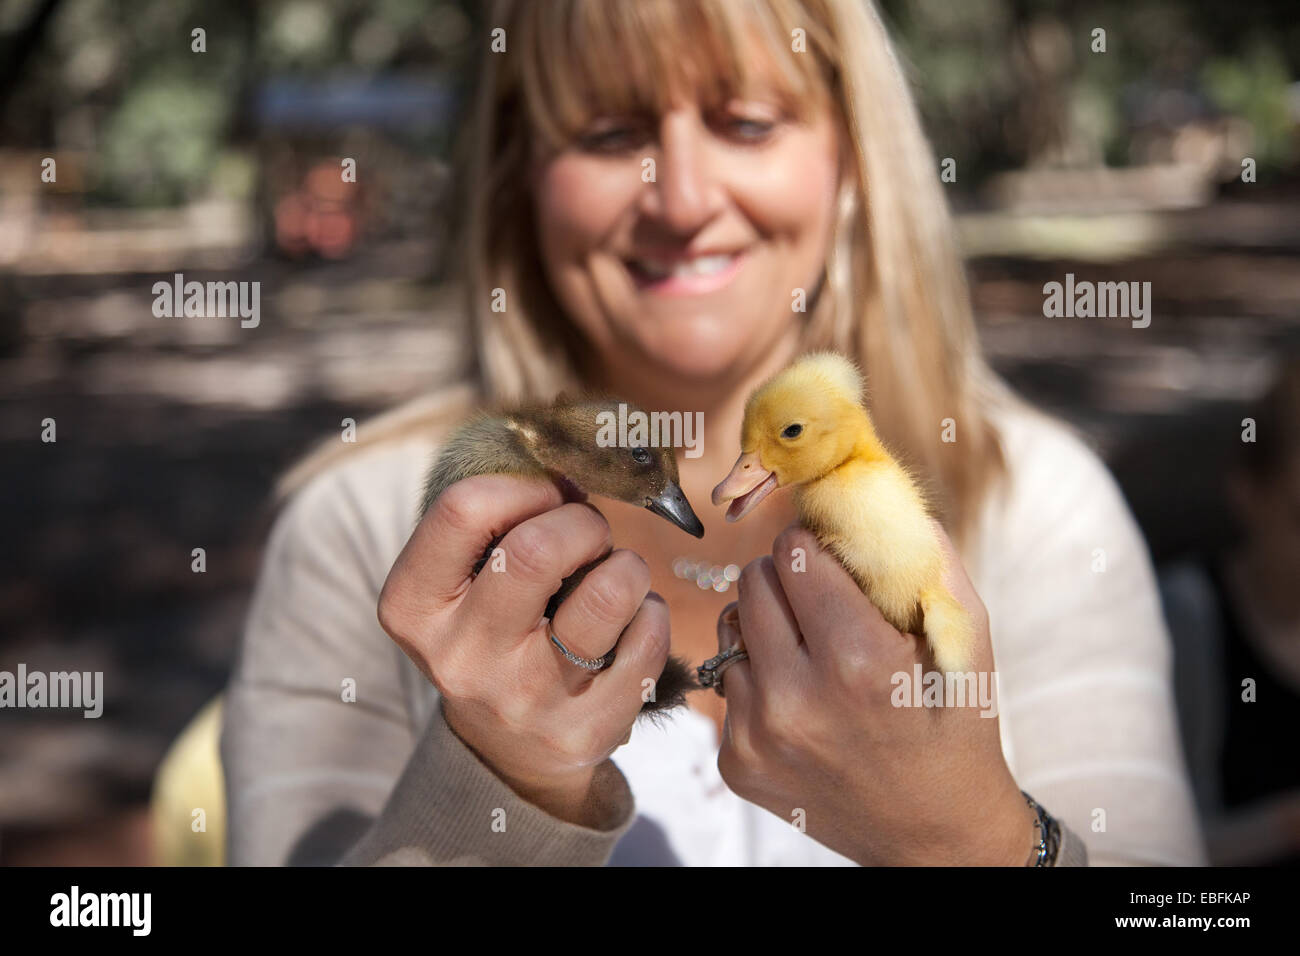 Woman holding baby Duck and Chick Stock Photo